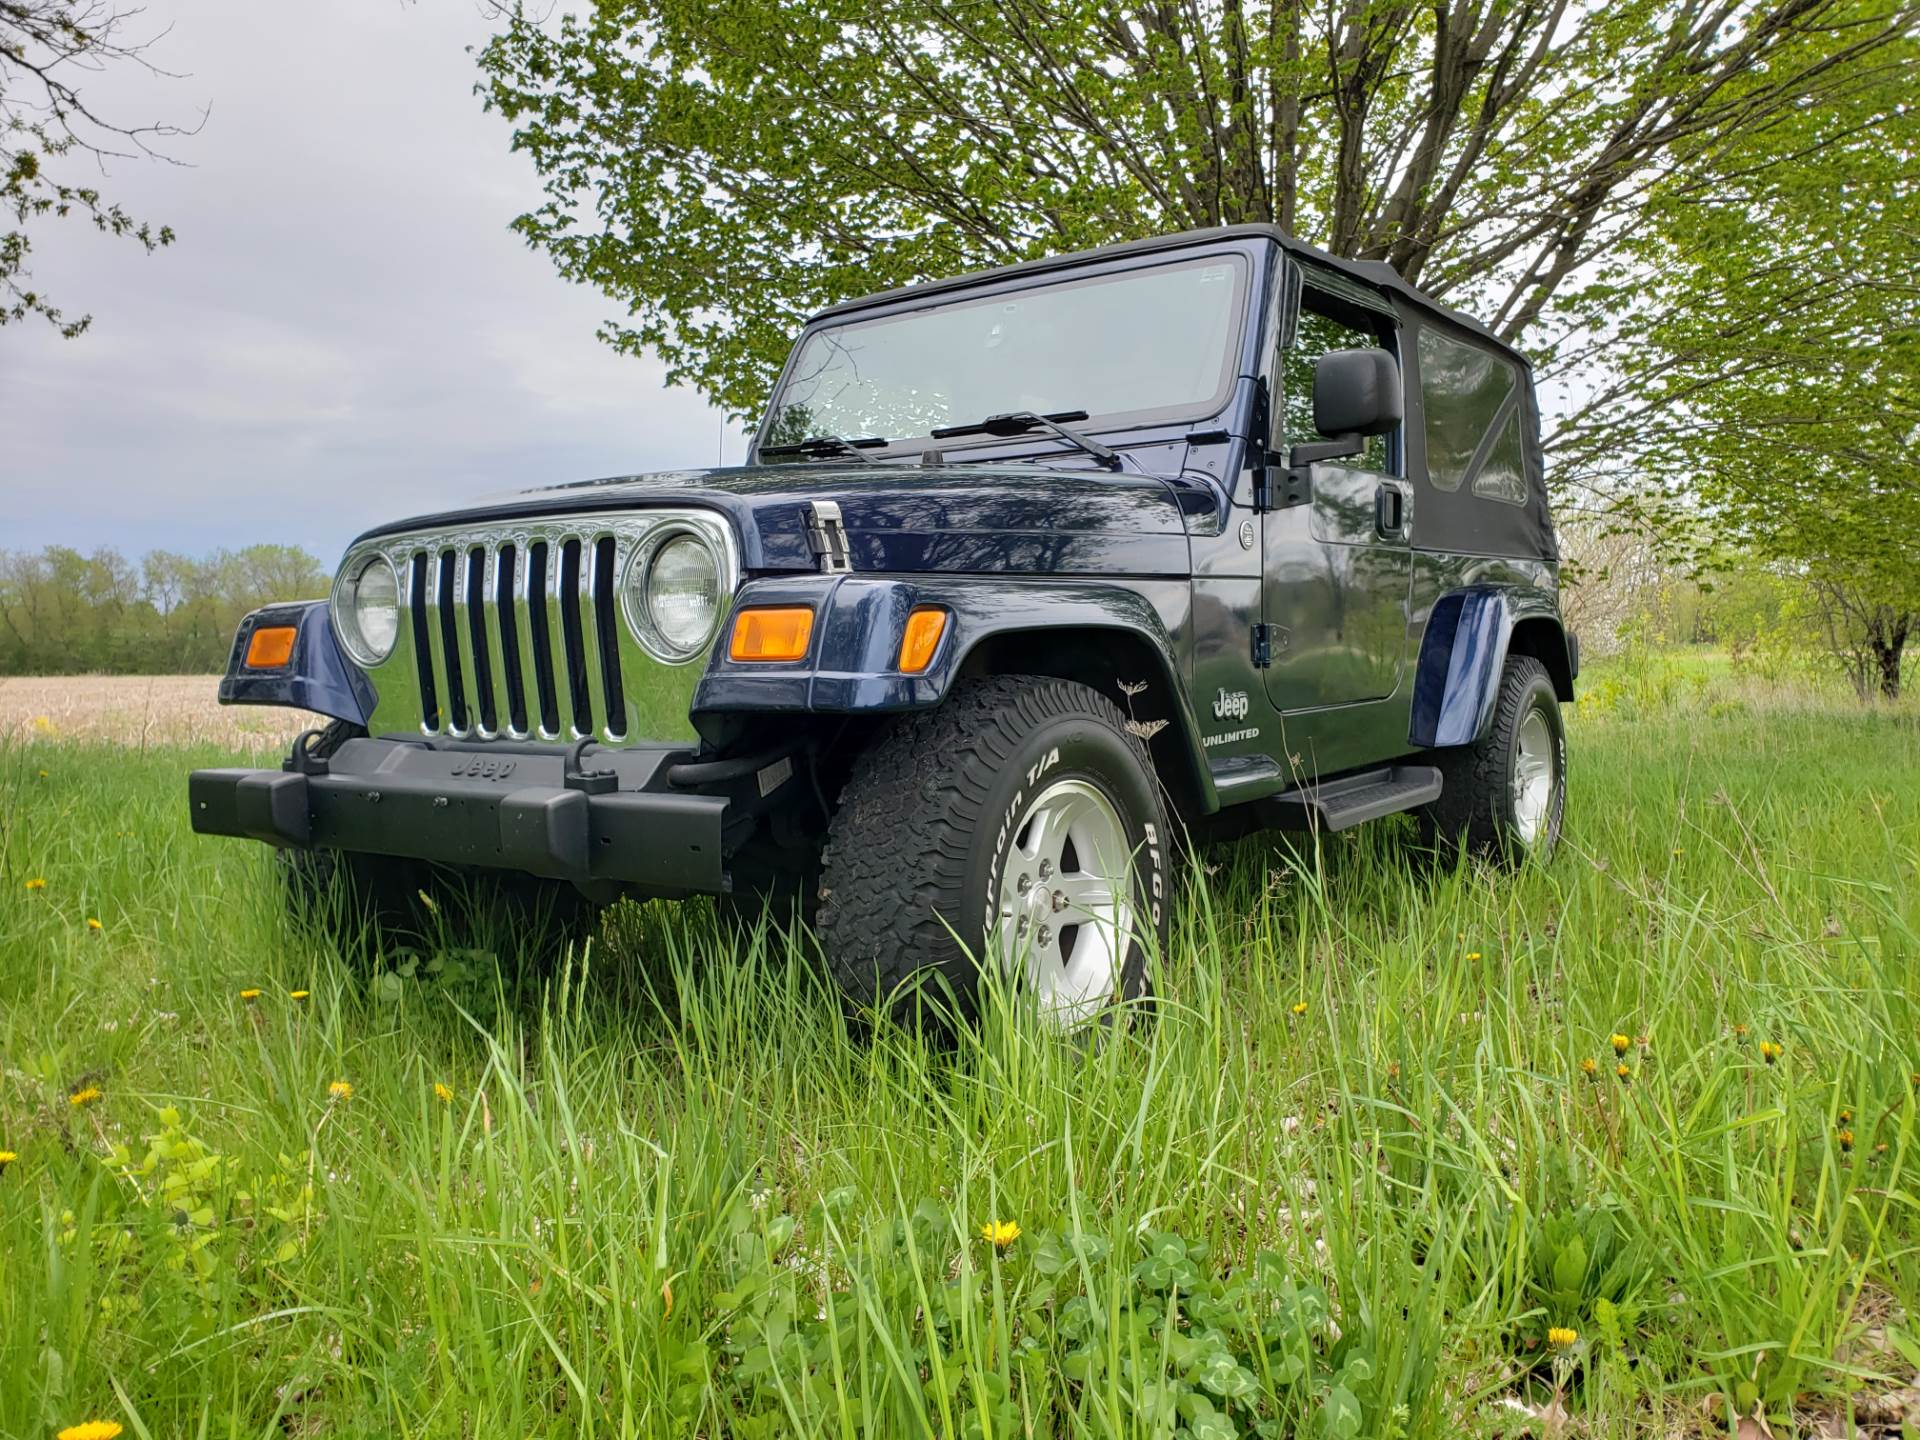 2006 Jeep Wrangler Unlimited 2dr SUV 4WD in Big Bend, Wisconsin - Photo 19